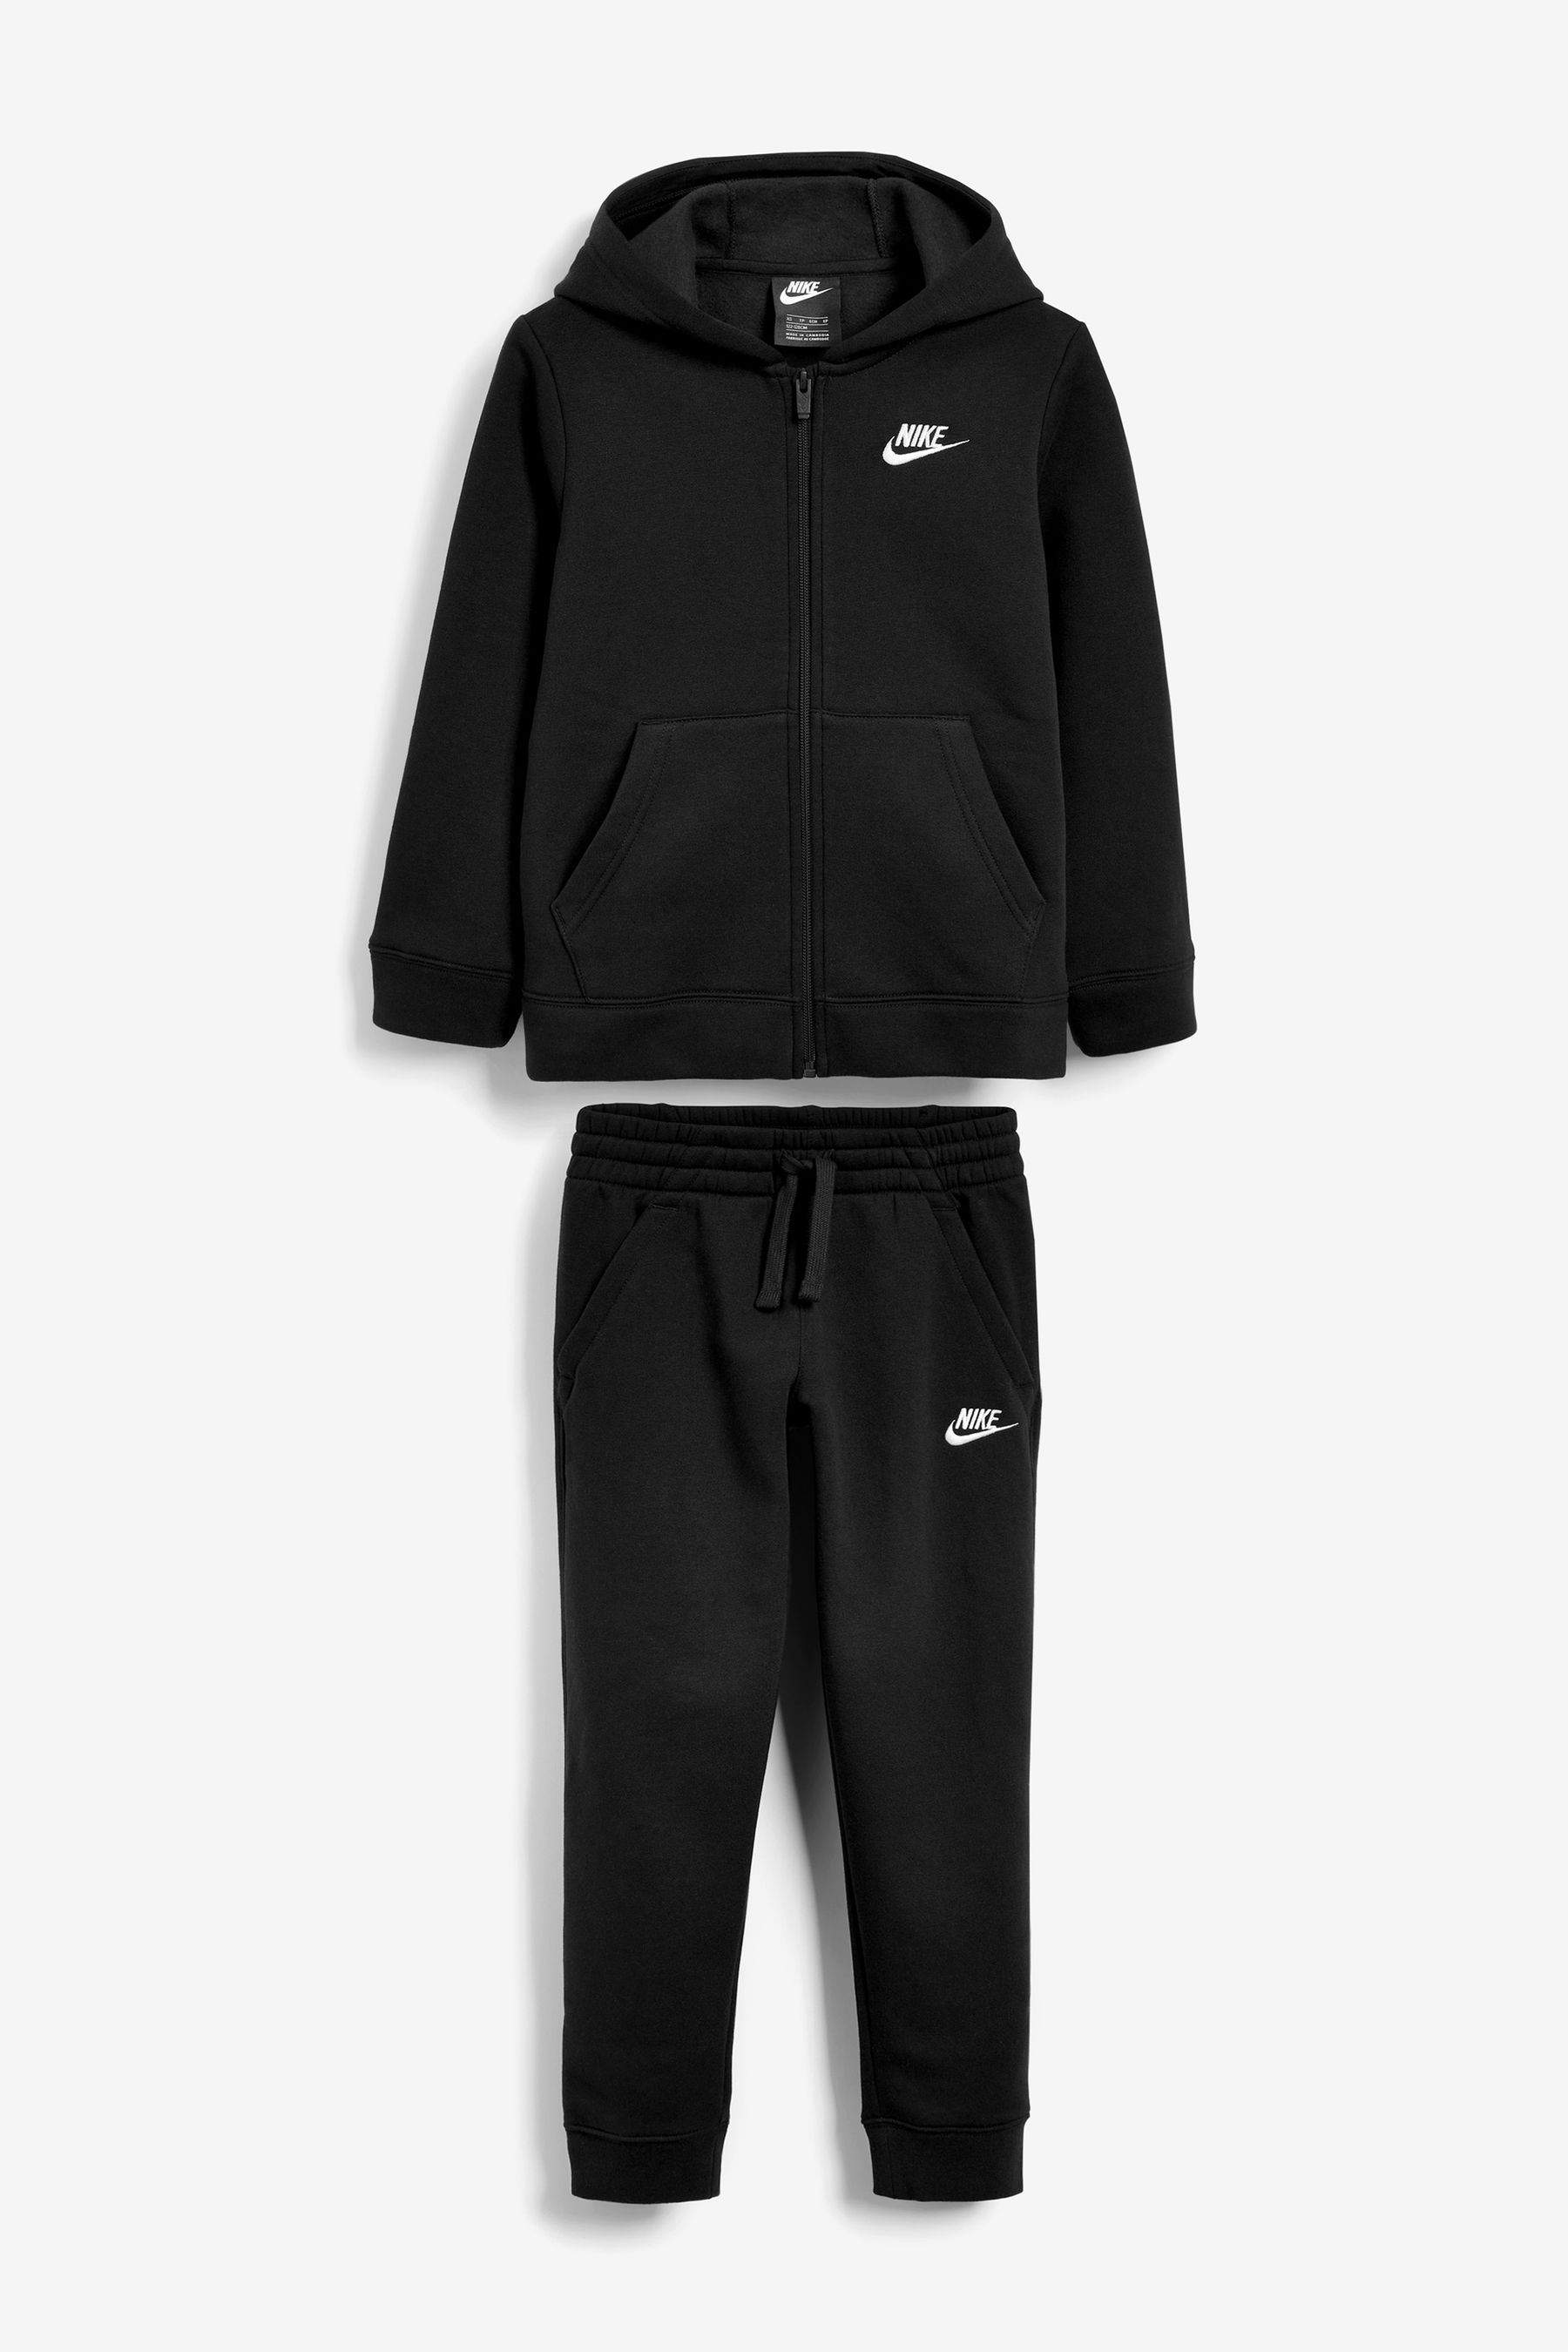 Buy Nike Black Club Fleece Tracksuit from the Next UK online shop